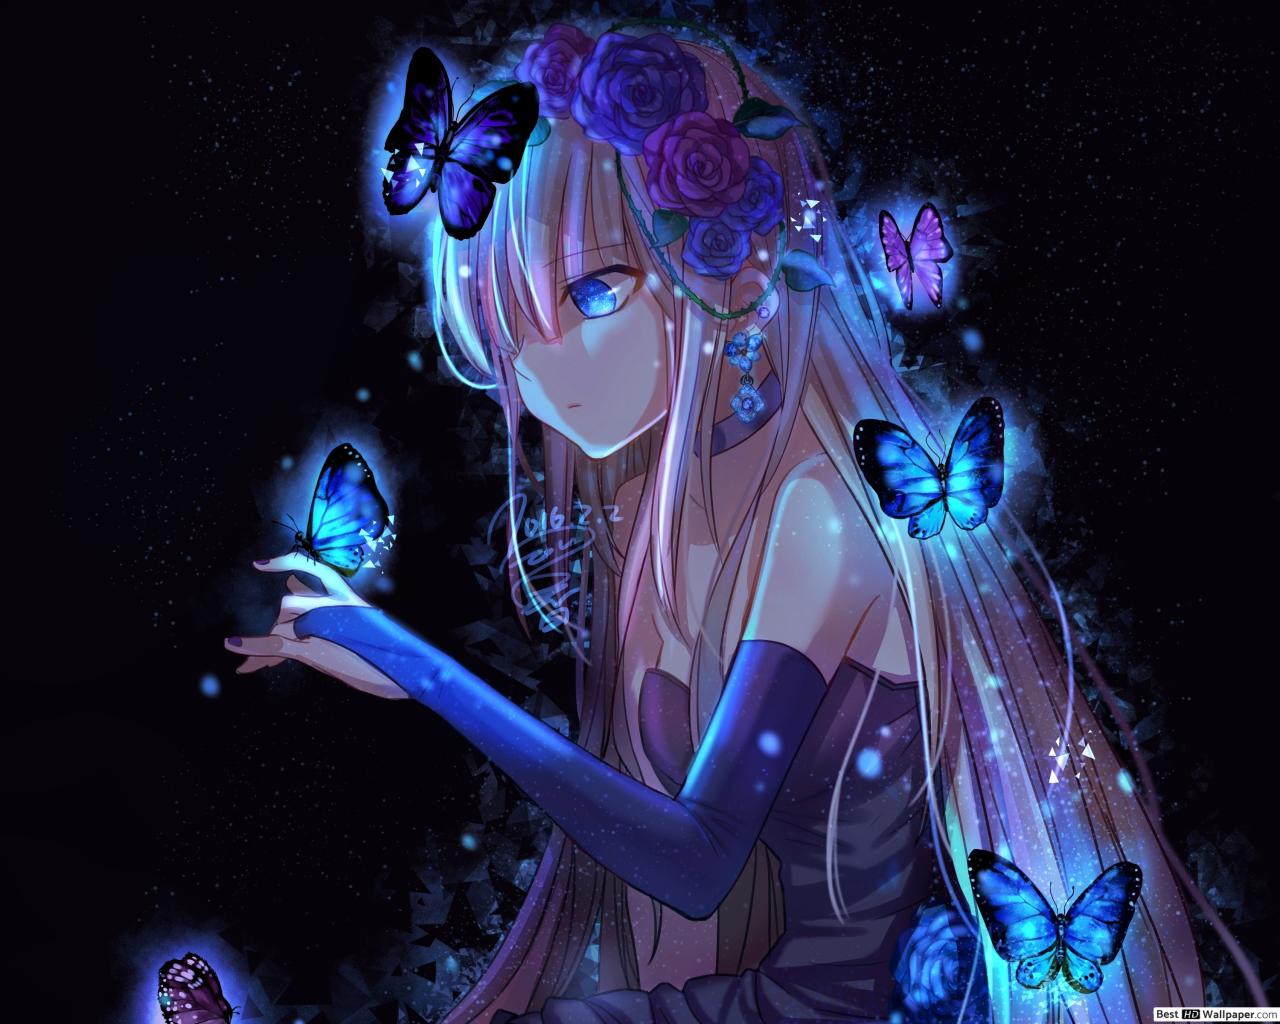 Anime Girl and Butterflies HD wallpaper download